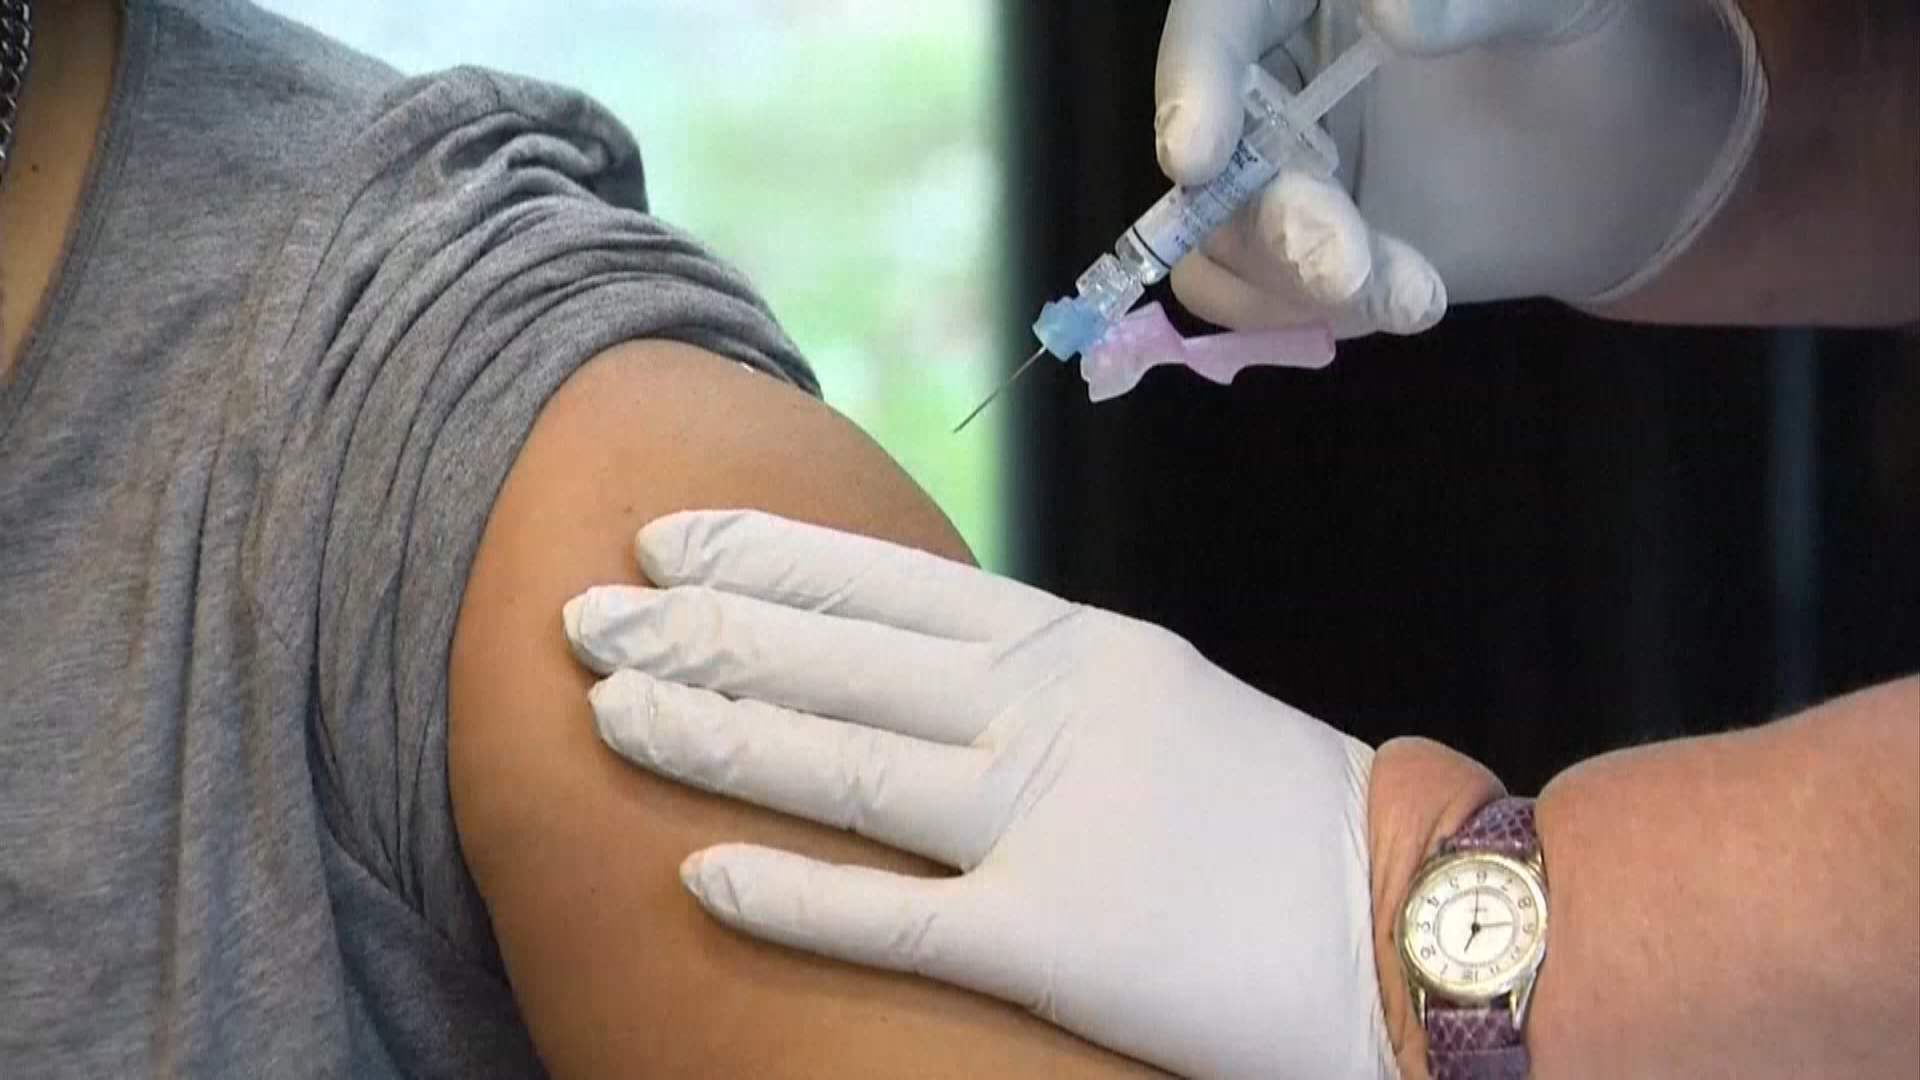 After a year in which flu cases were way down, doctors are expecting those cases to jump back up this year.